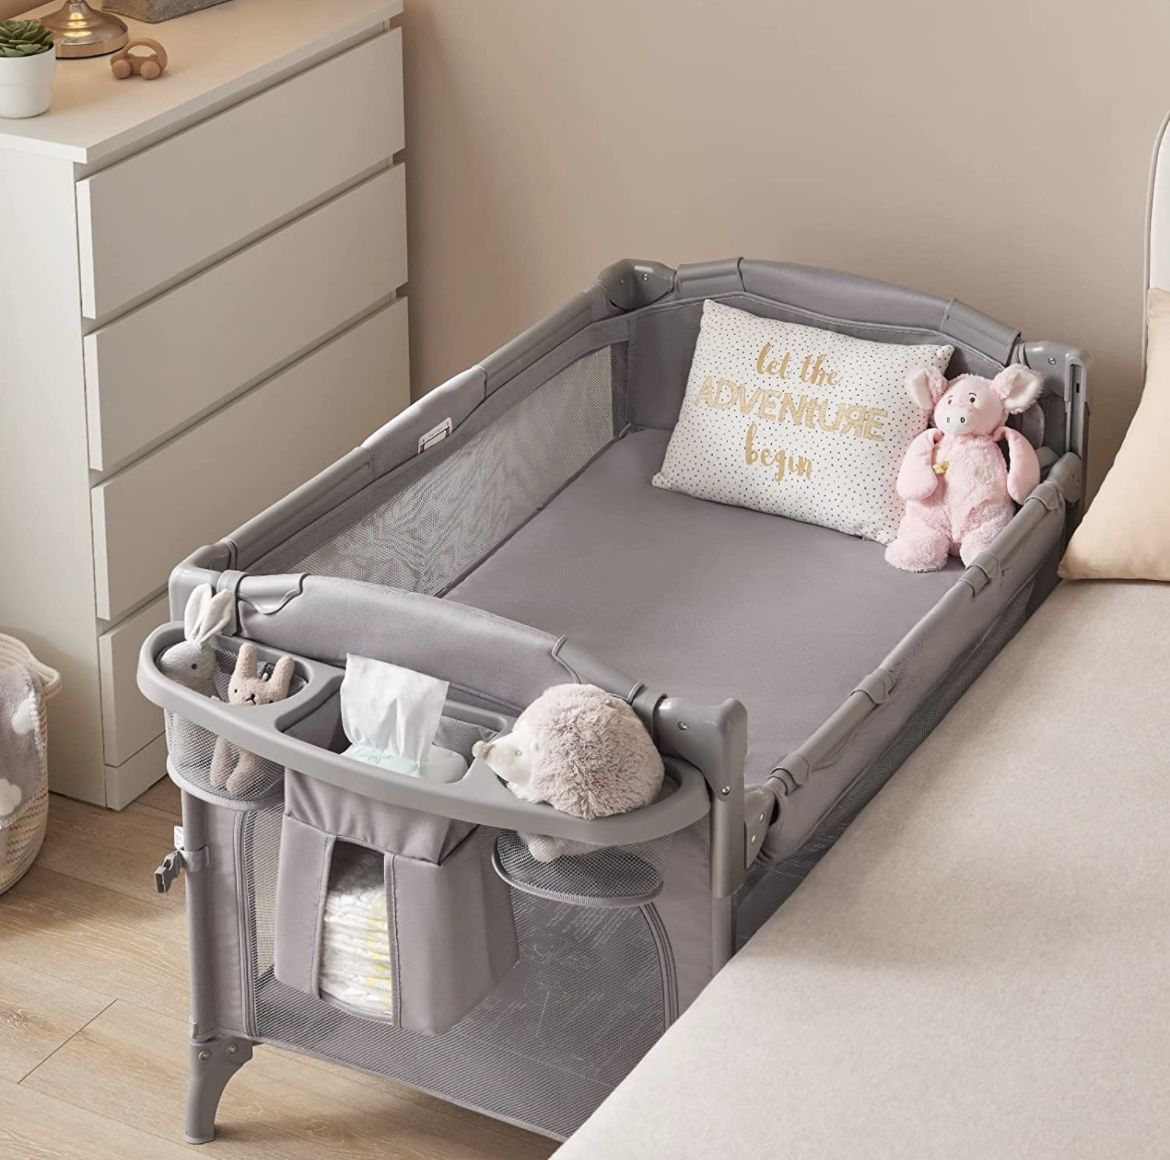  Baby 4 in 1 Bassinet Bedside Sleeper, Baby Bedside Crib 4 Functions, Bedside Bassinet Crib Sleeper, Playard, Changing Table, Baby Bassinet for Newbor